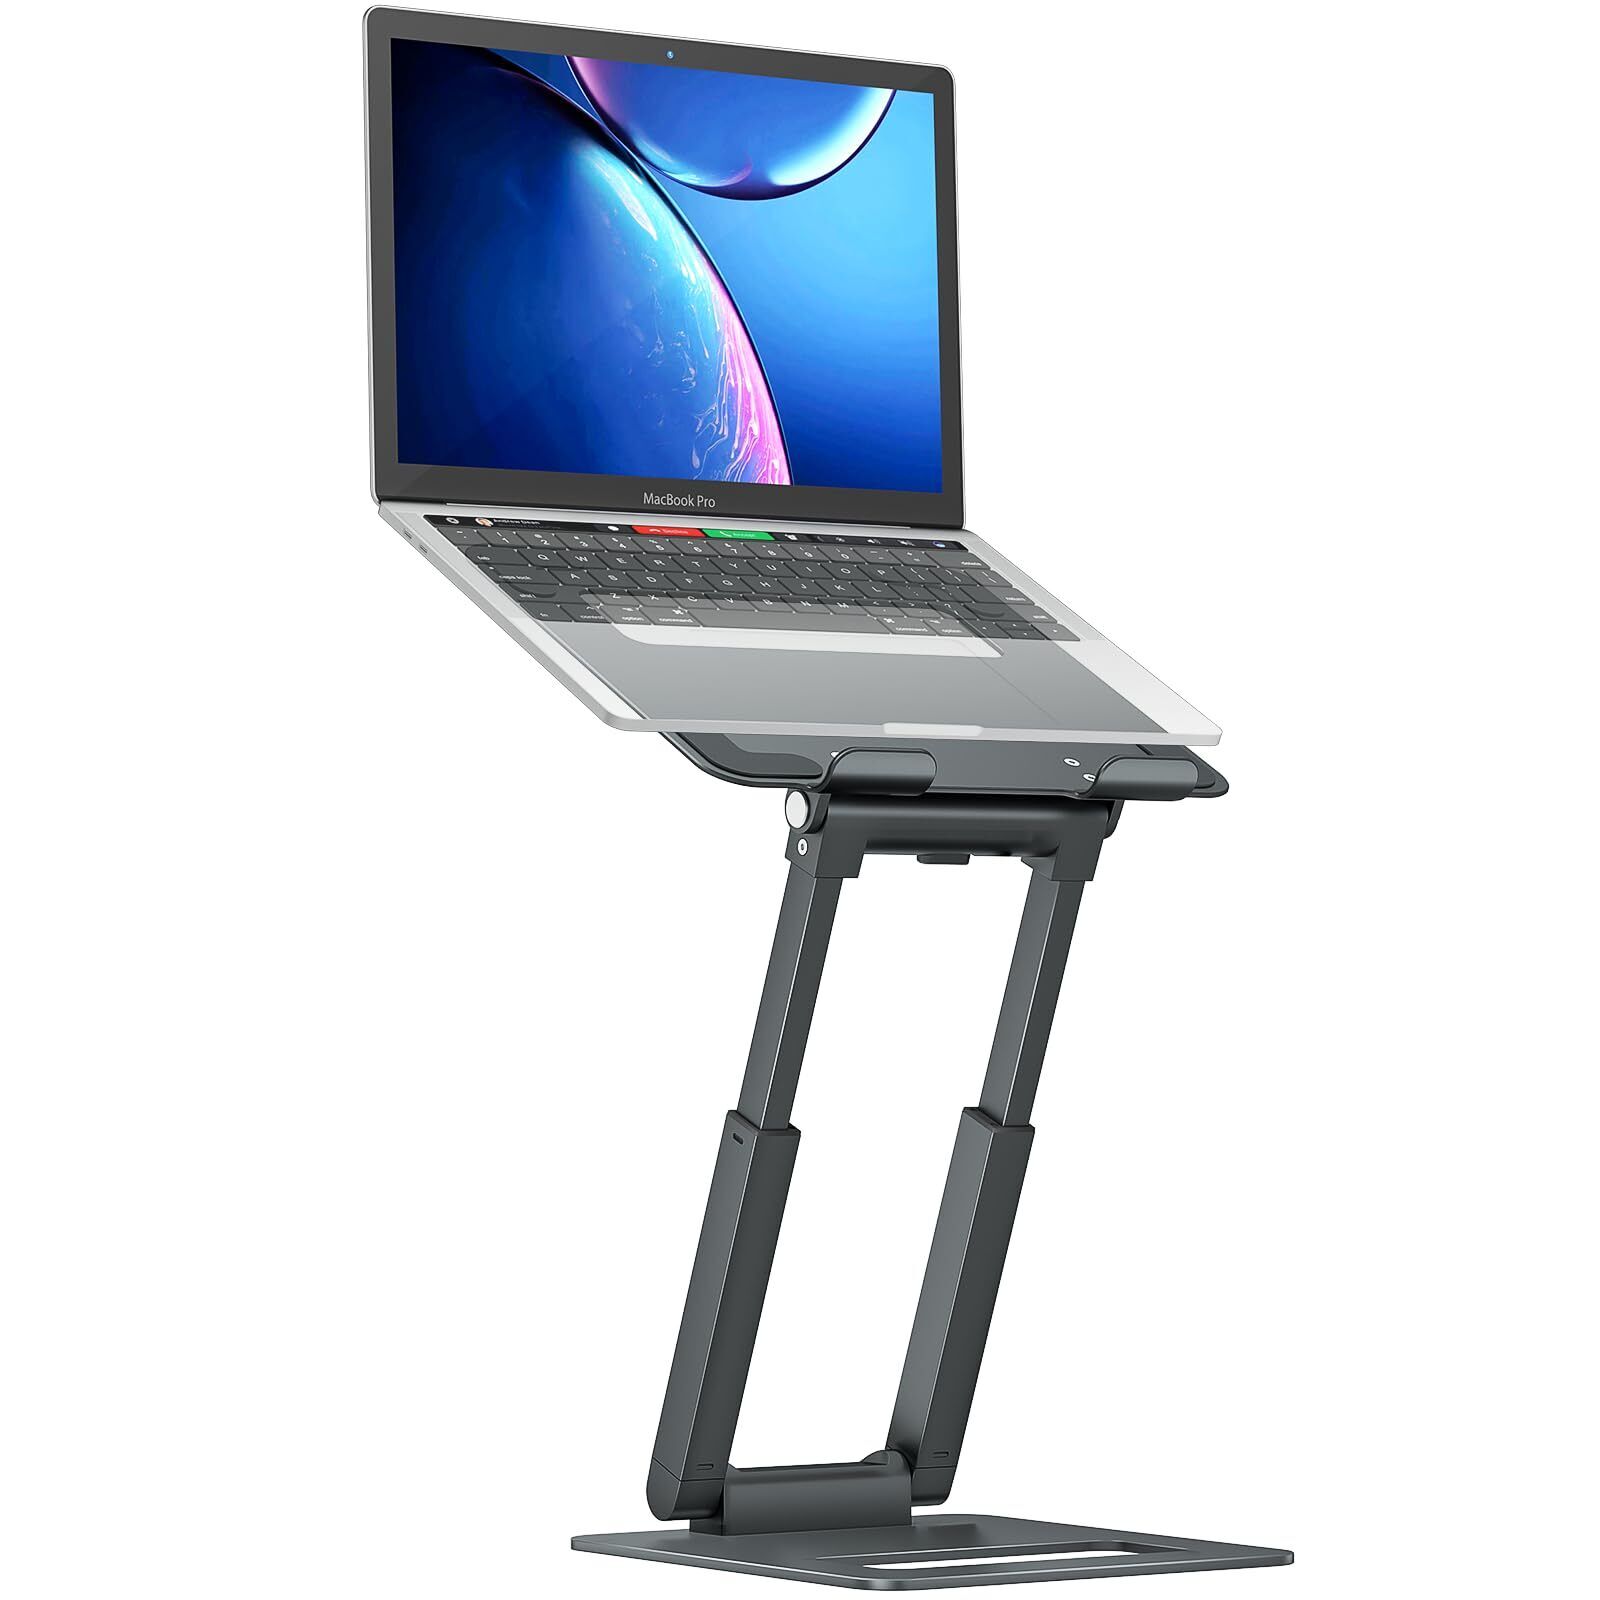 tounee Laptop Stand for Desk Adjustable Height Telescopic 360 Rotating Pull O...